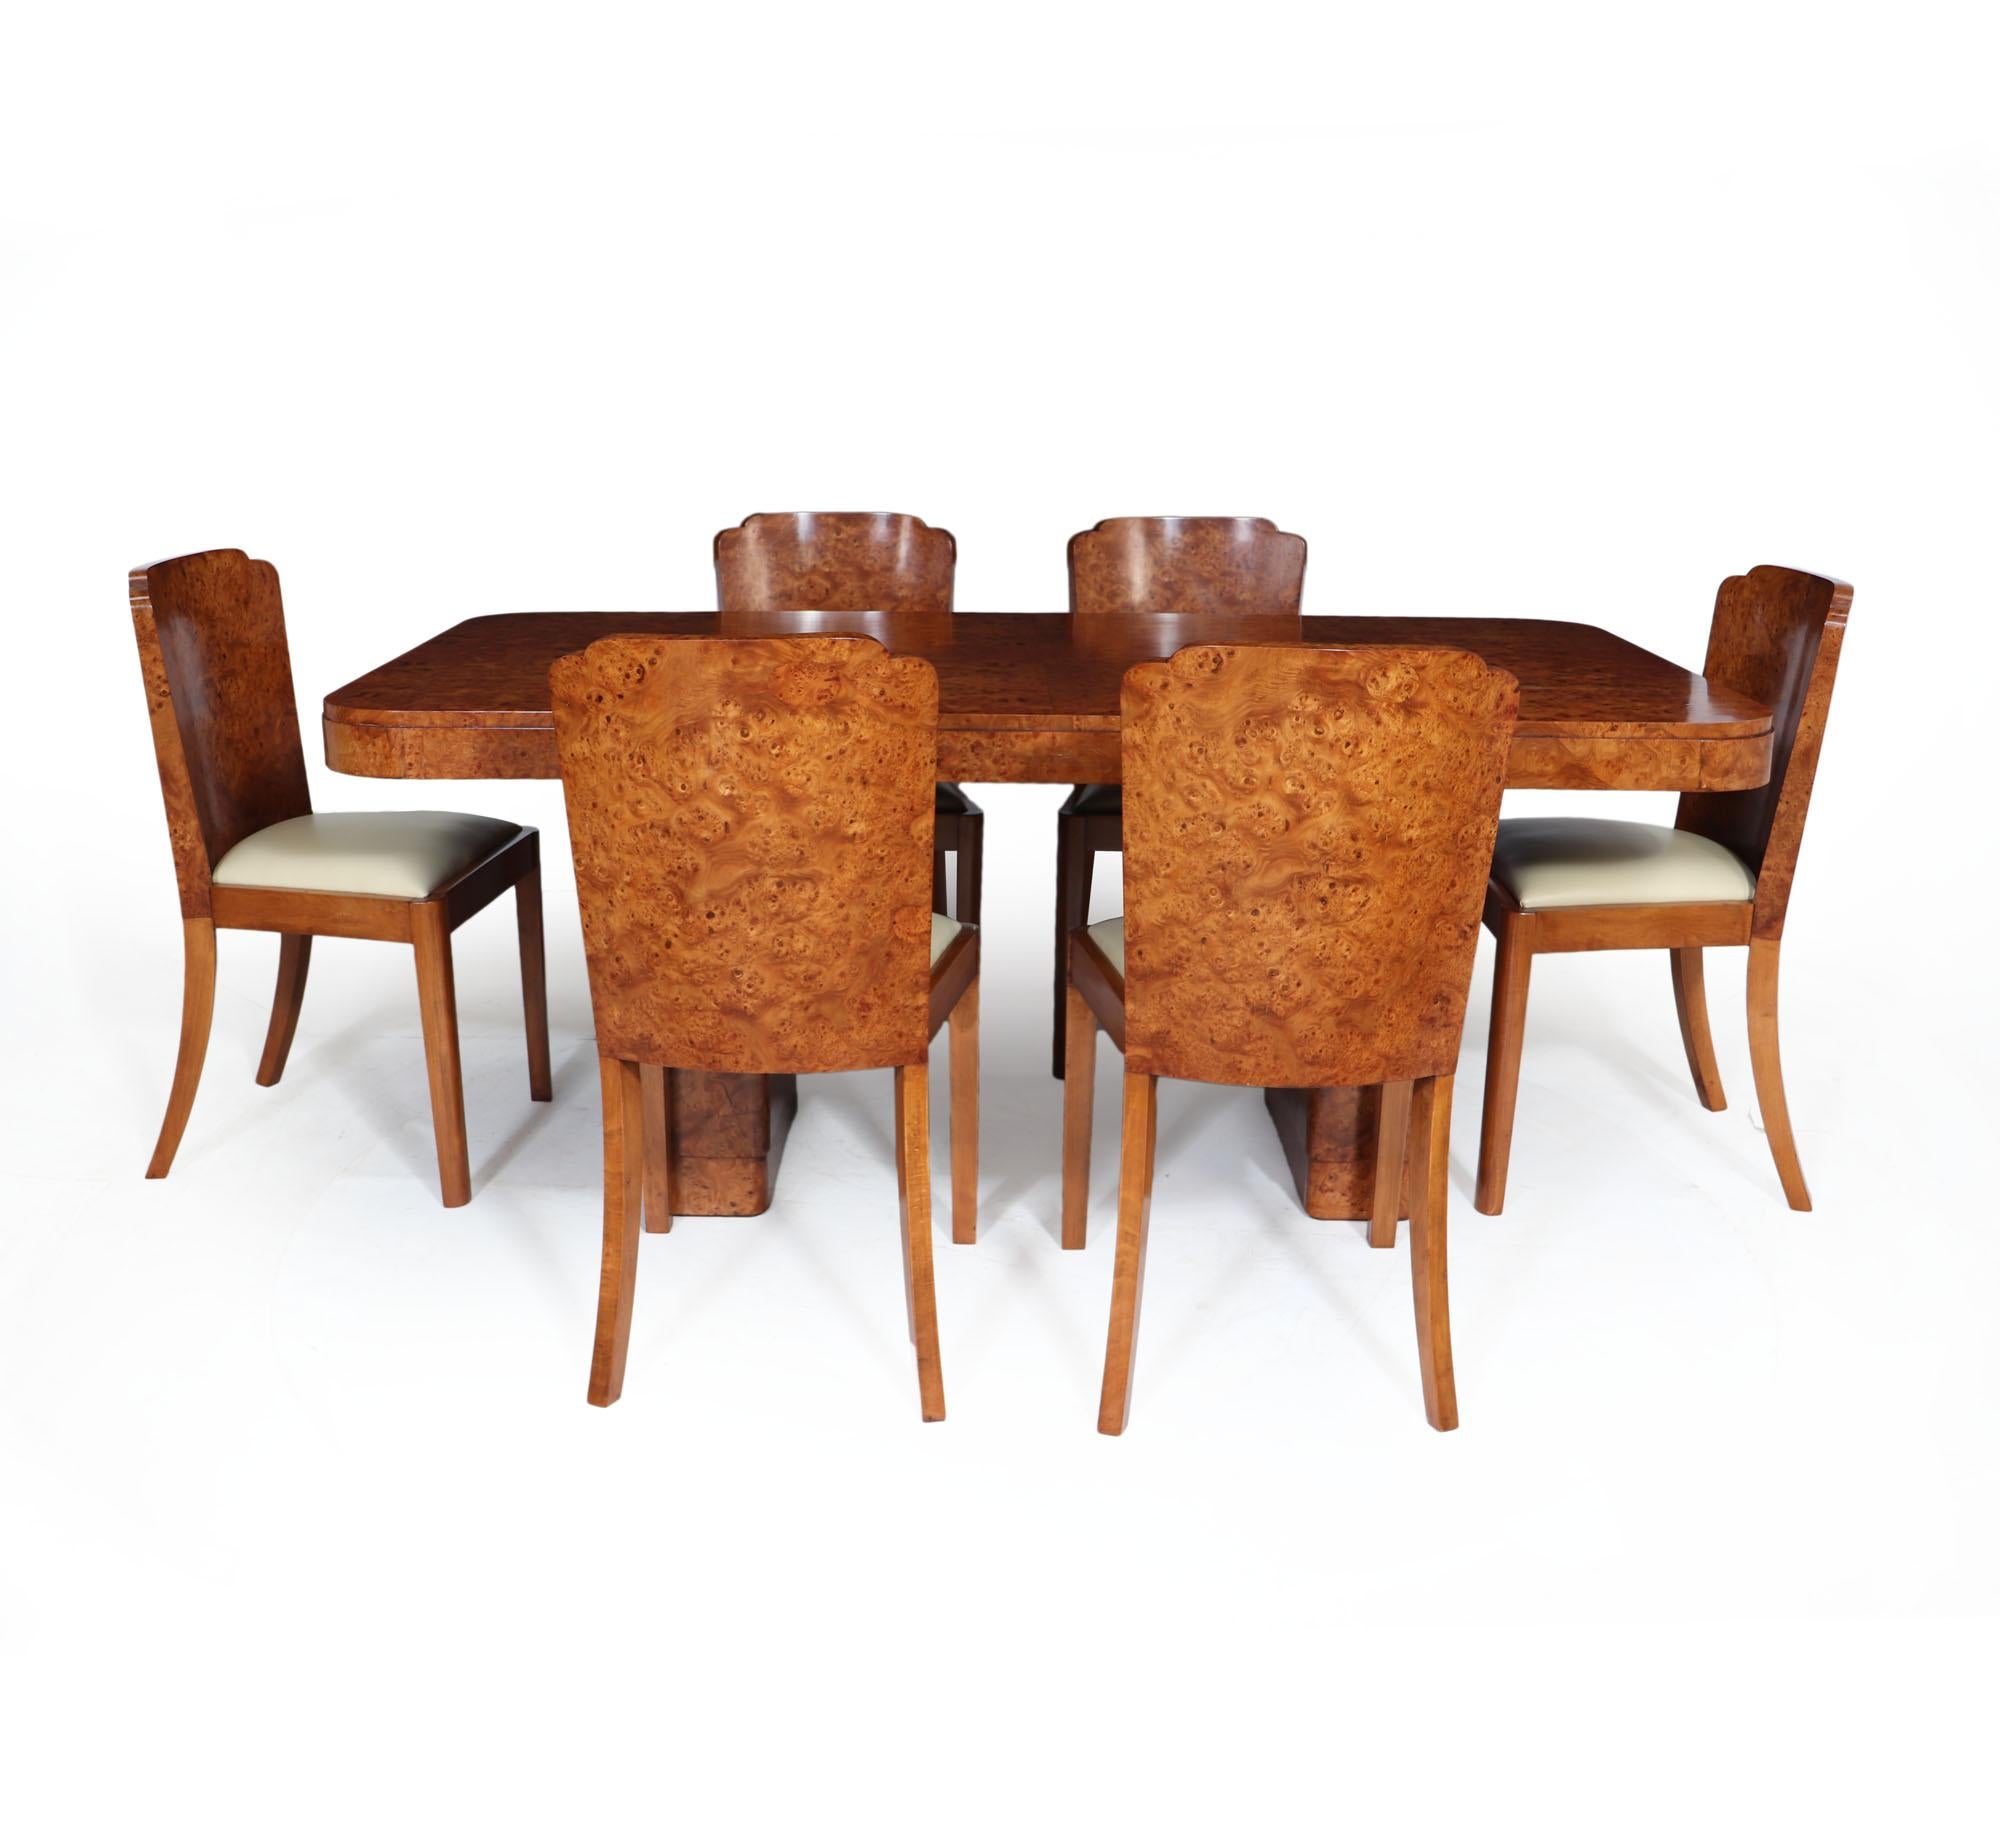 Mid-20th Century Art Deco Dining Table and Chairs in Burr Walnut